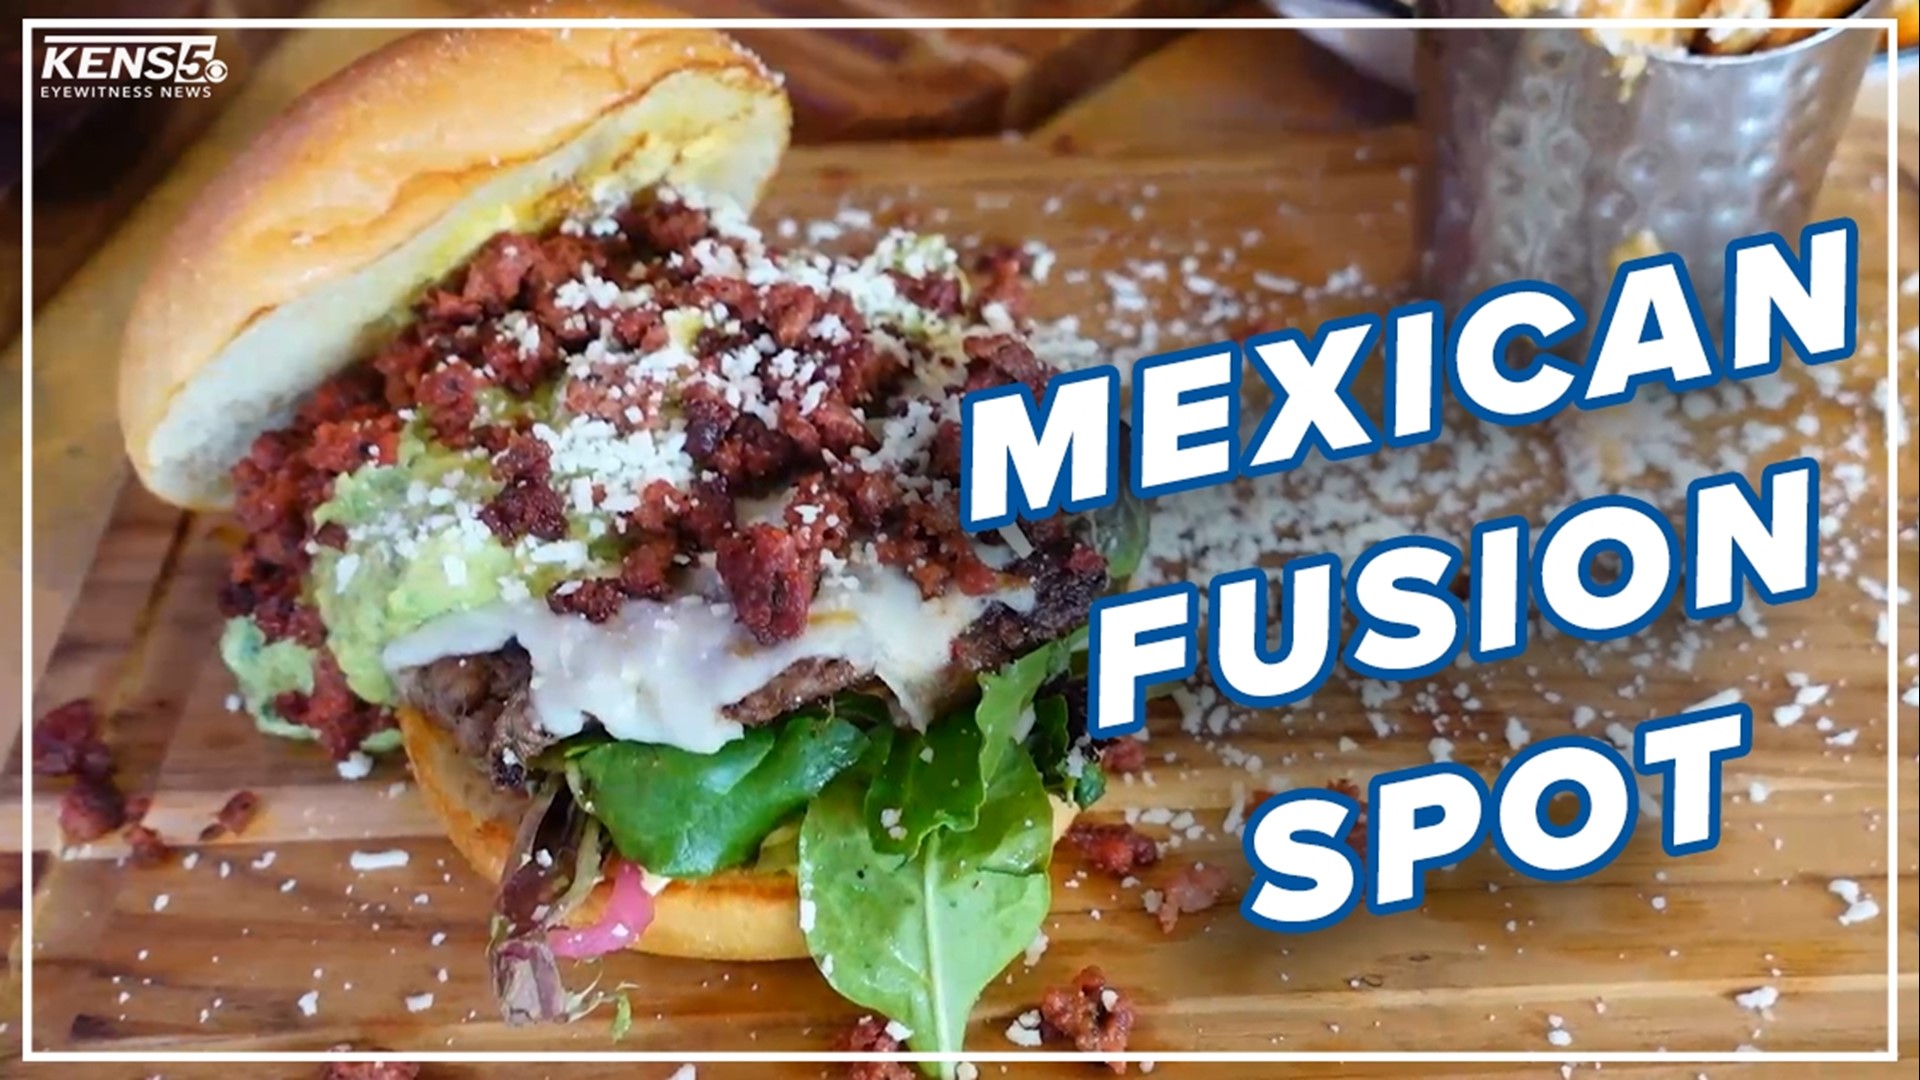 It's a go-to spot for eclectic Mexican fusion where the chef has personally curated each item to have its own unique touch.